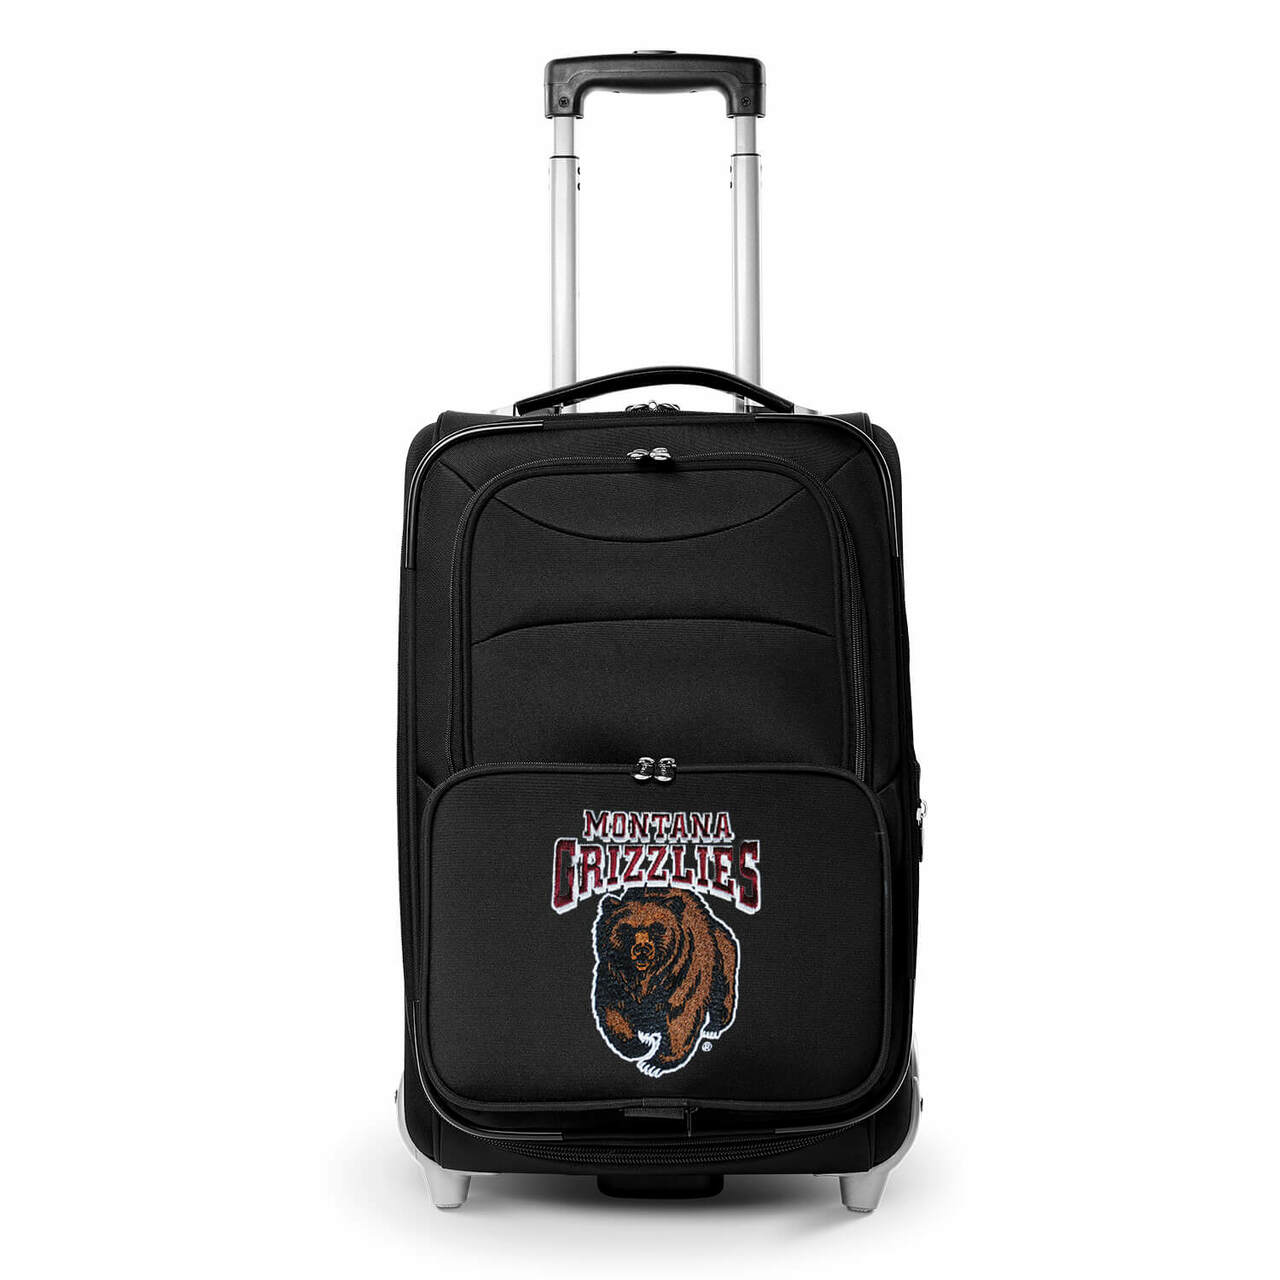 Grizzlies Carry On Luggage | Montana Grizzlies Rolling Carry On Luggage